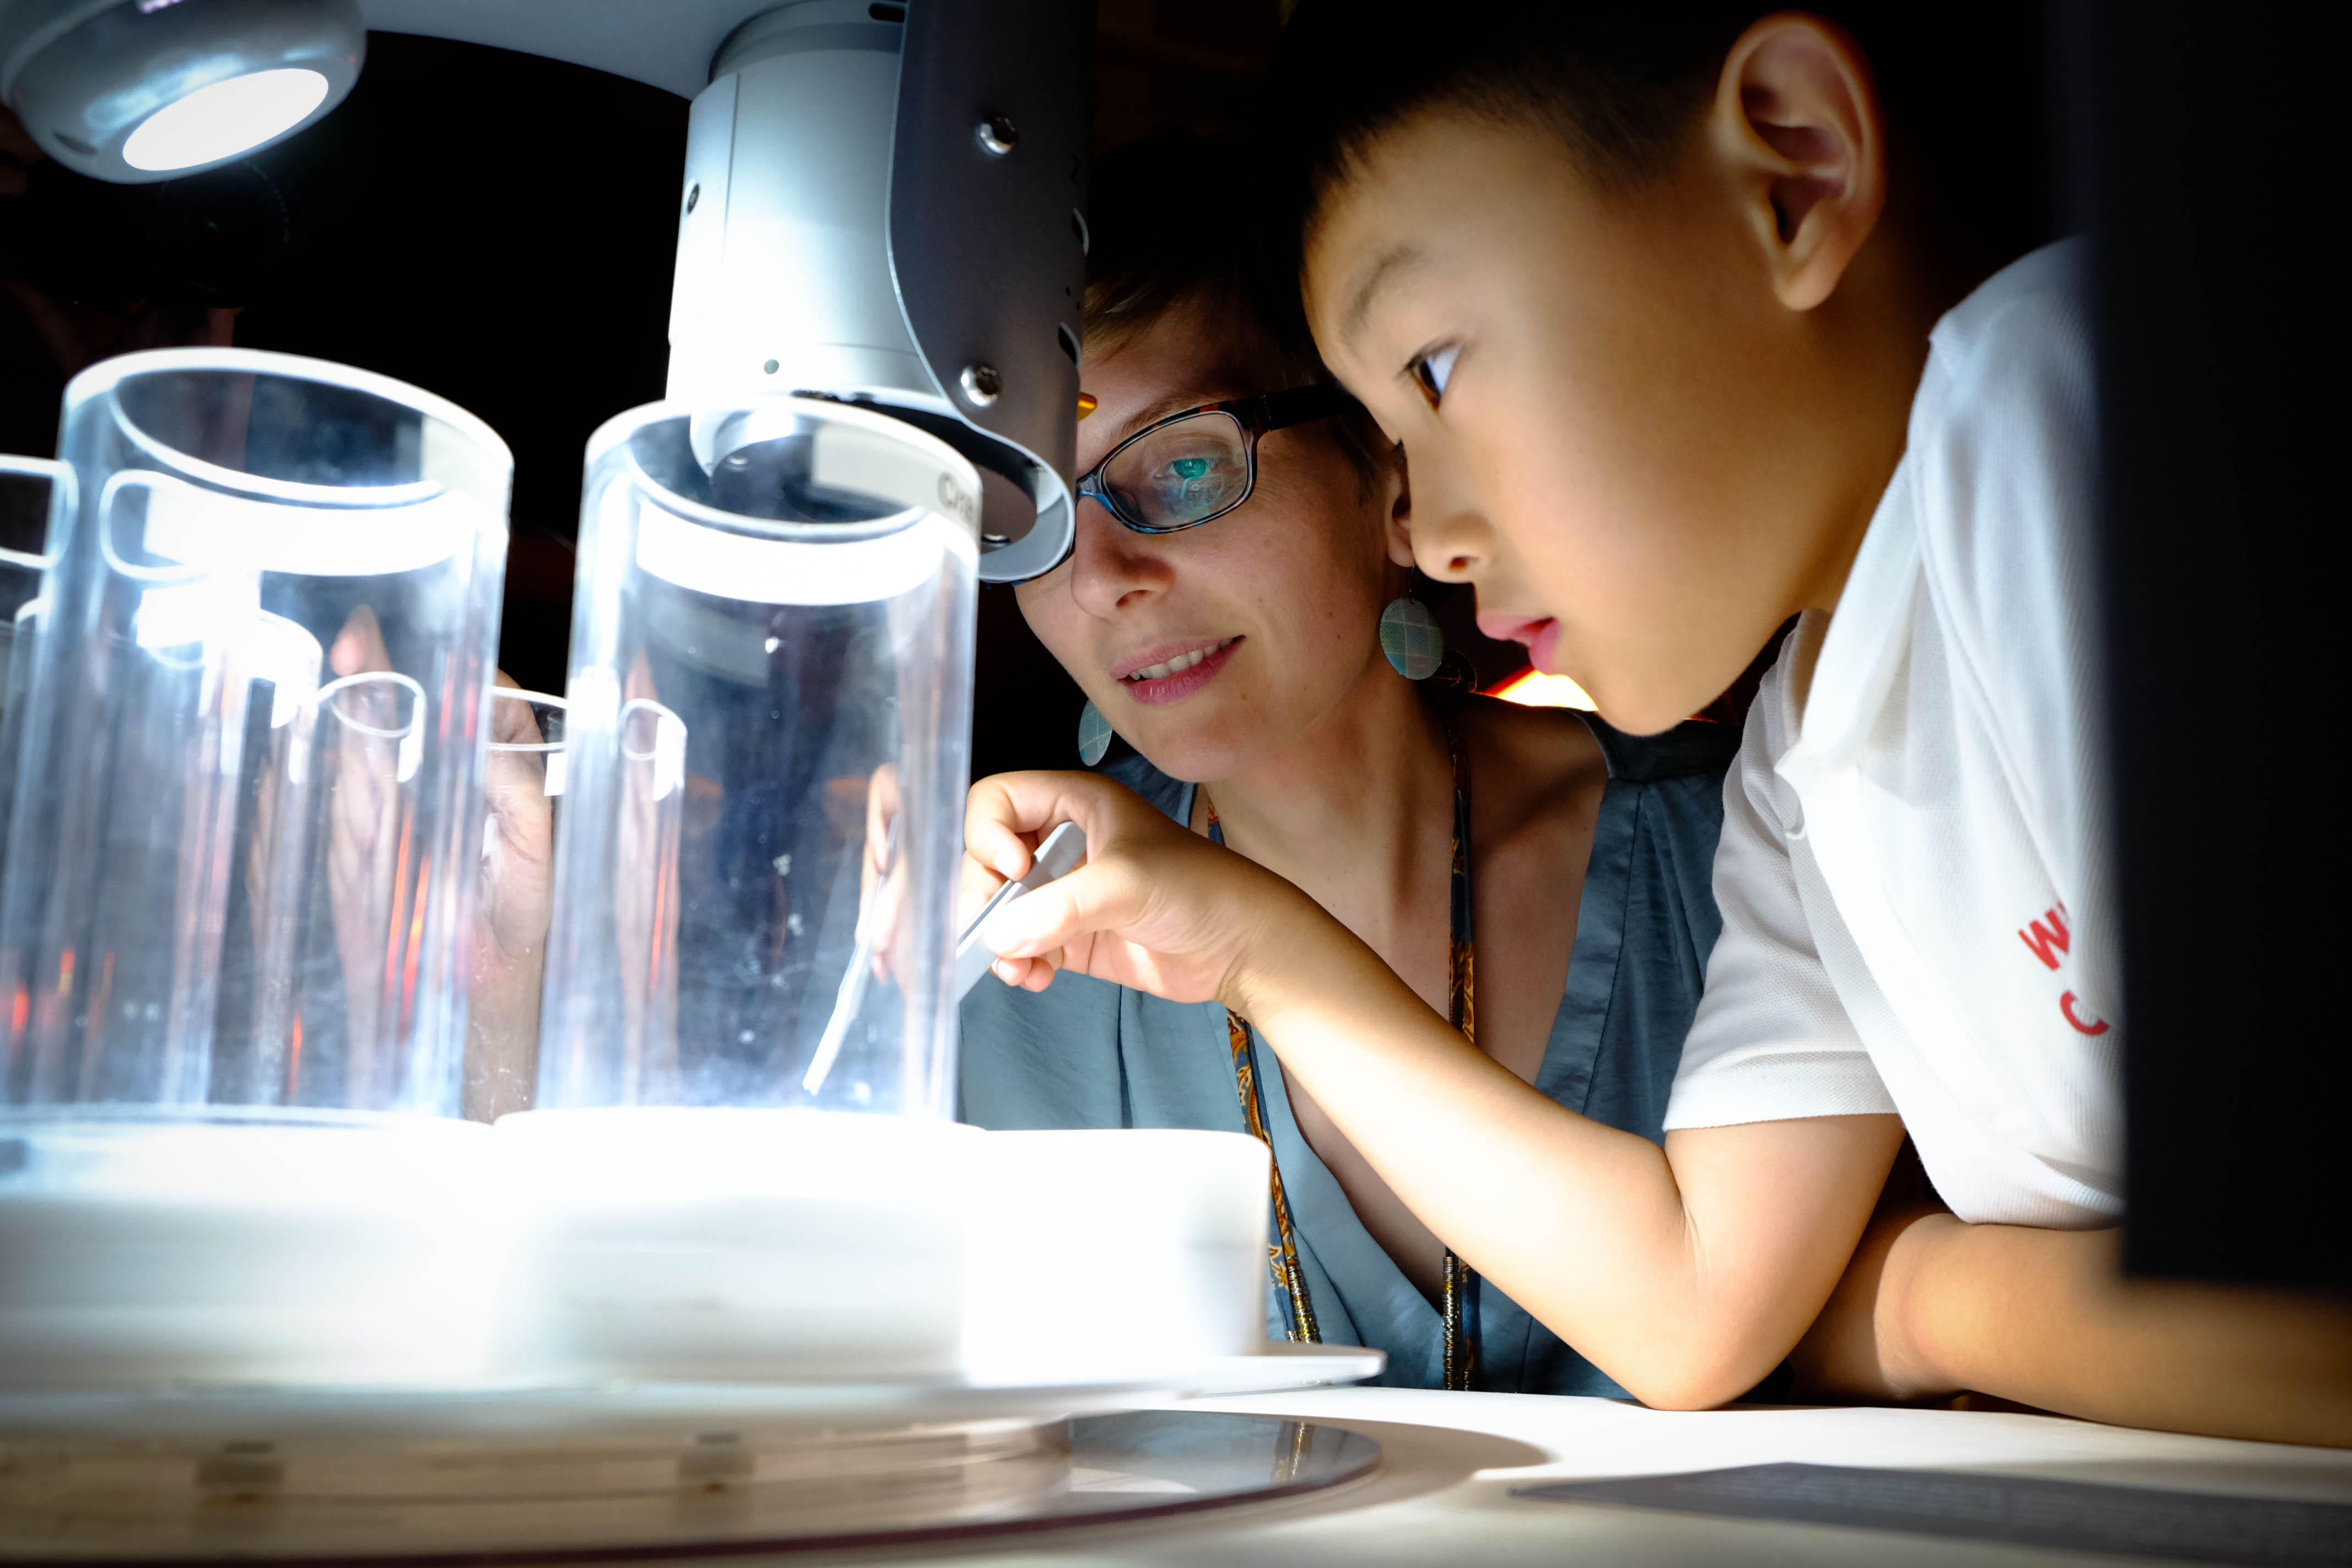 Dr Aurélie Coudurier-Curveur trying out the microfossil exhibit prototype on the floor of Science Centre with a visitor (Source: Kuang Jianhong/Earth Observatory of Singapore)